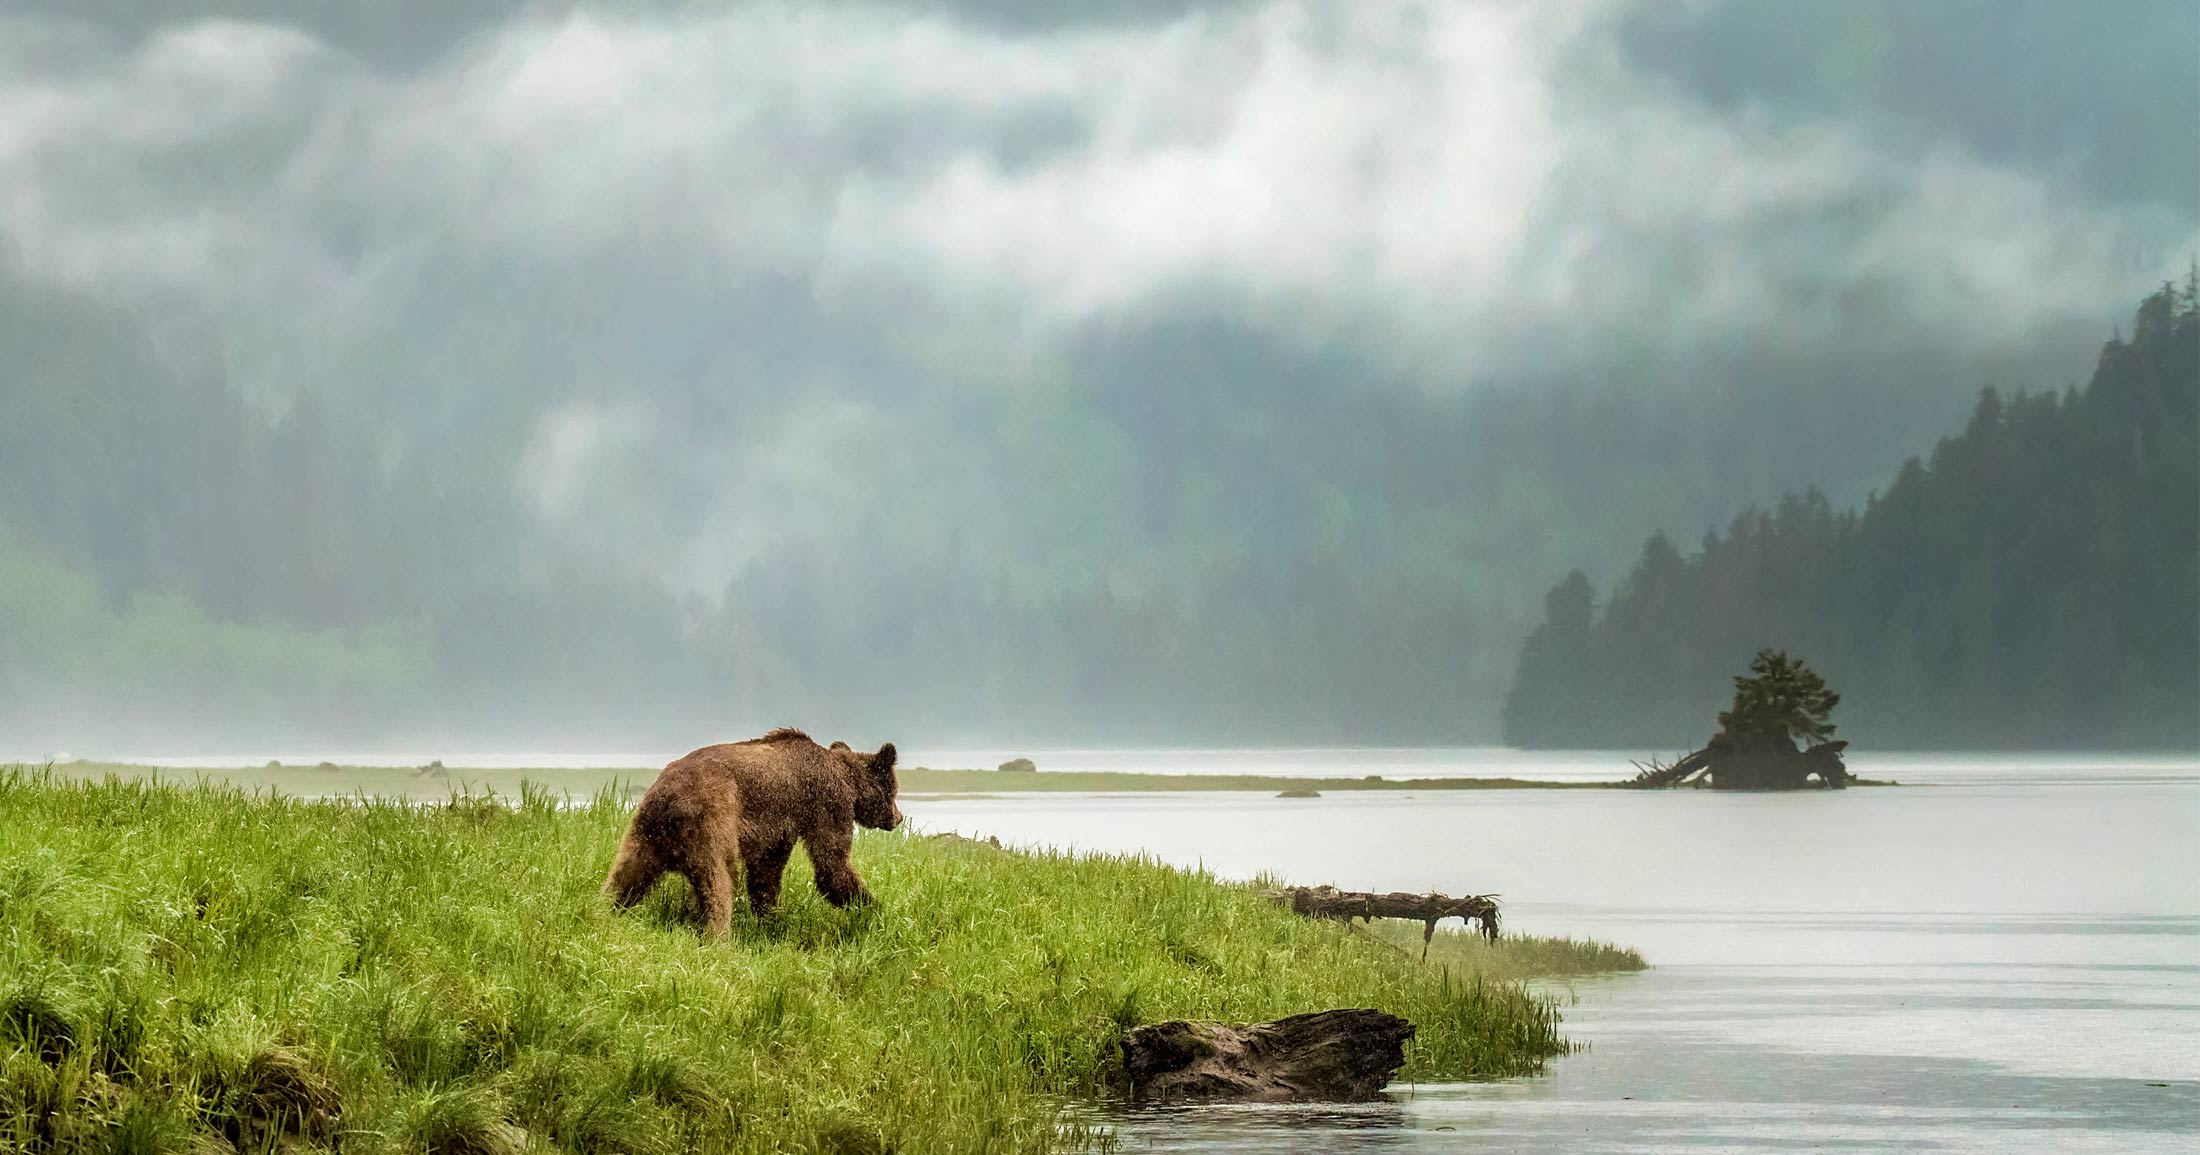 A grizzly bear wanders out over a grassy point in the Khutzeymateen.